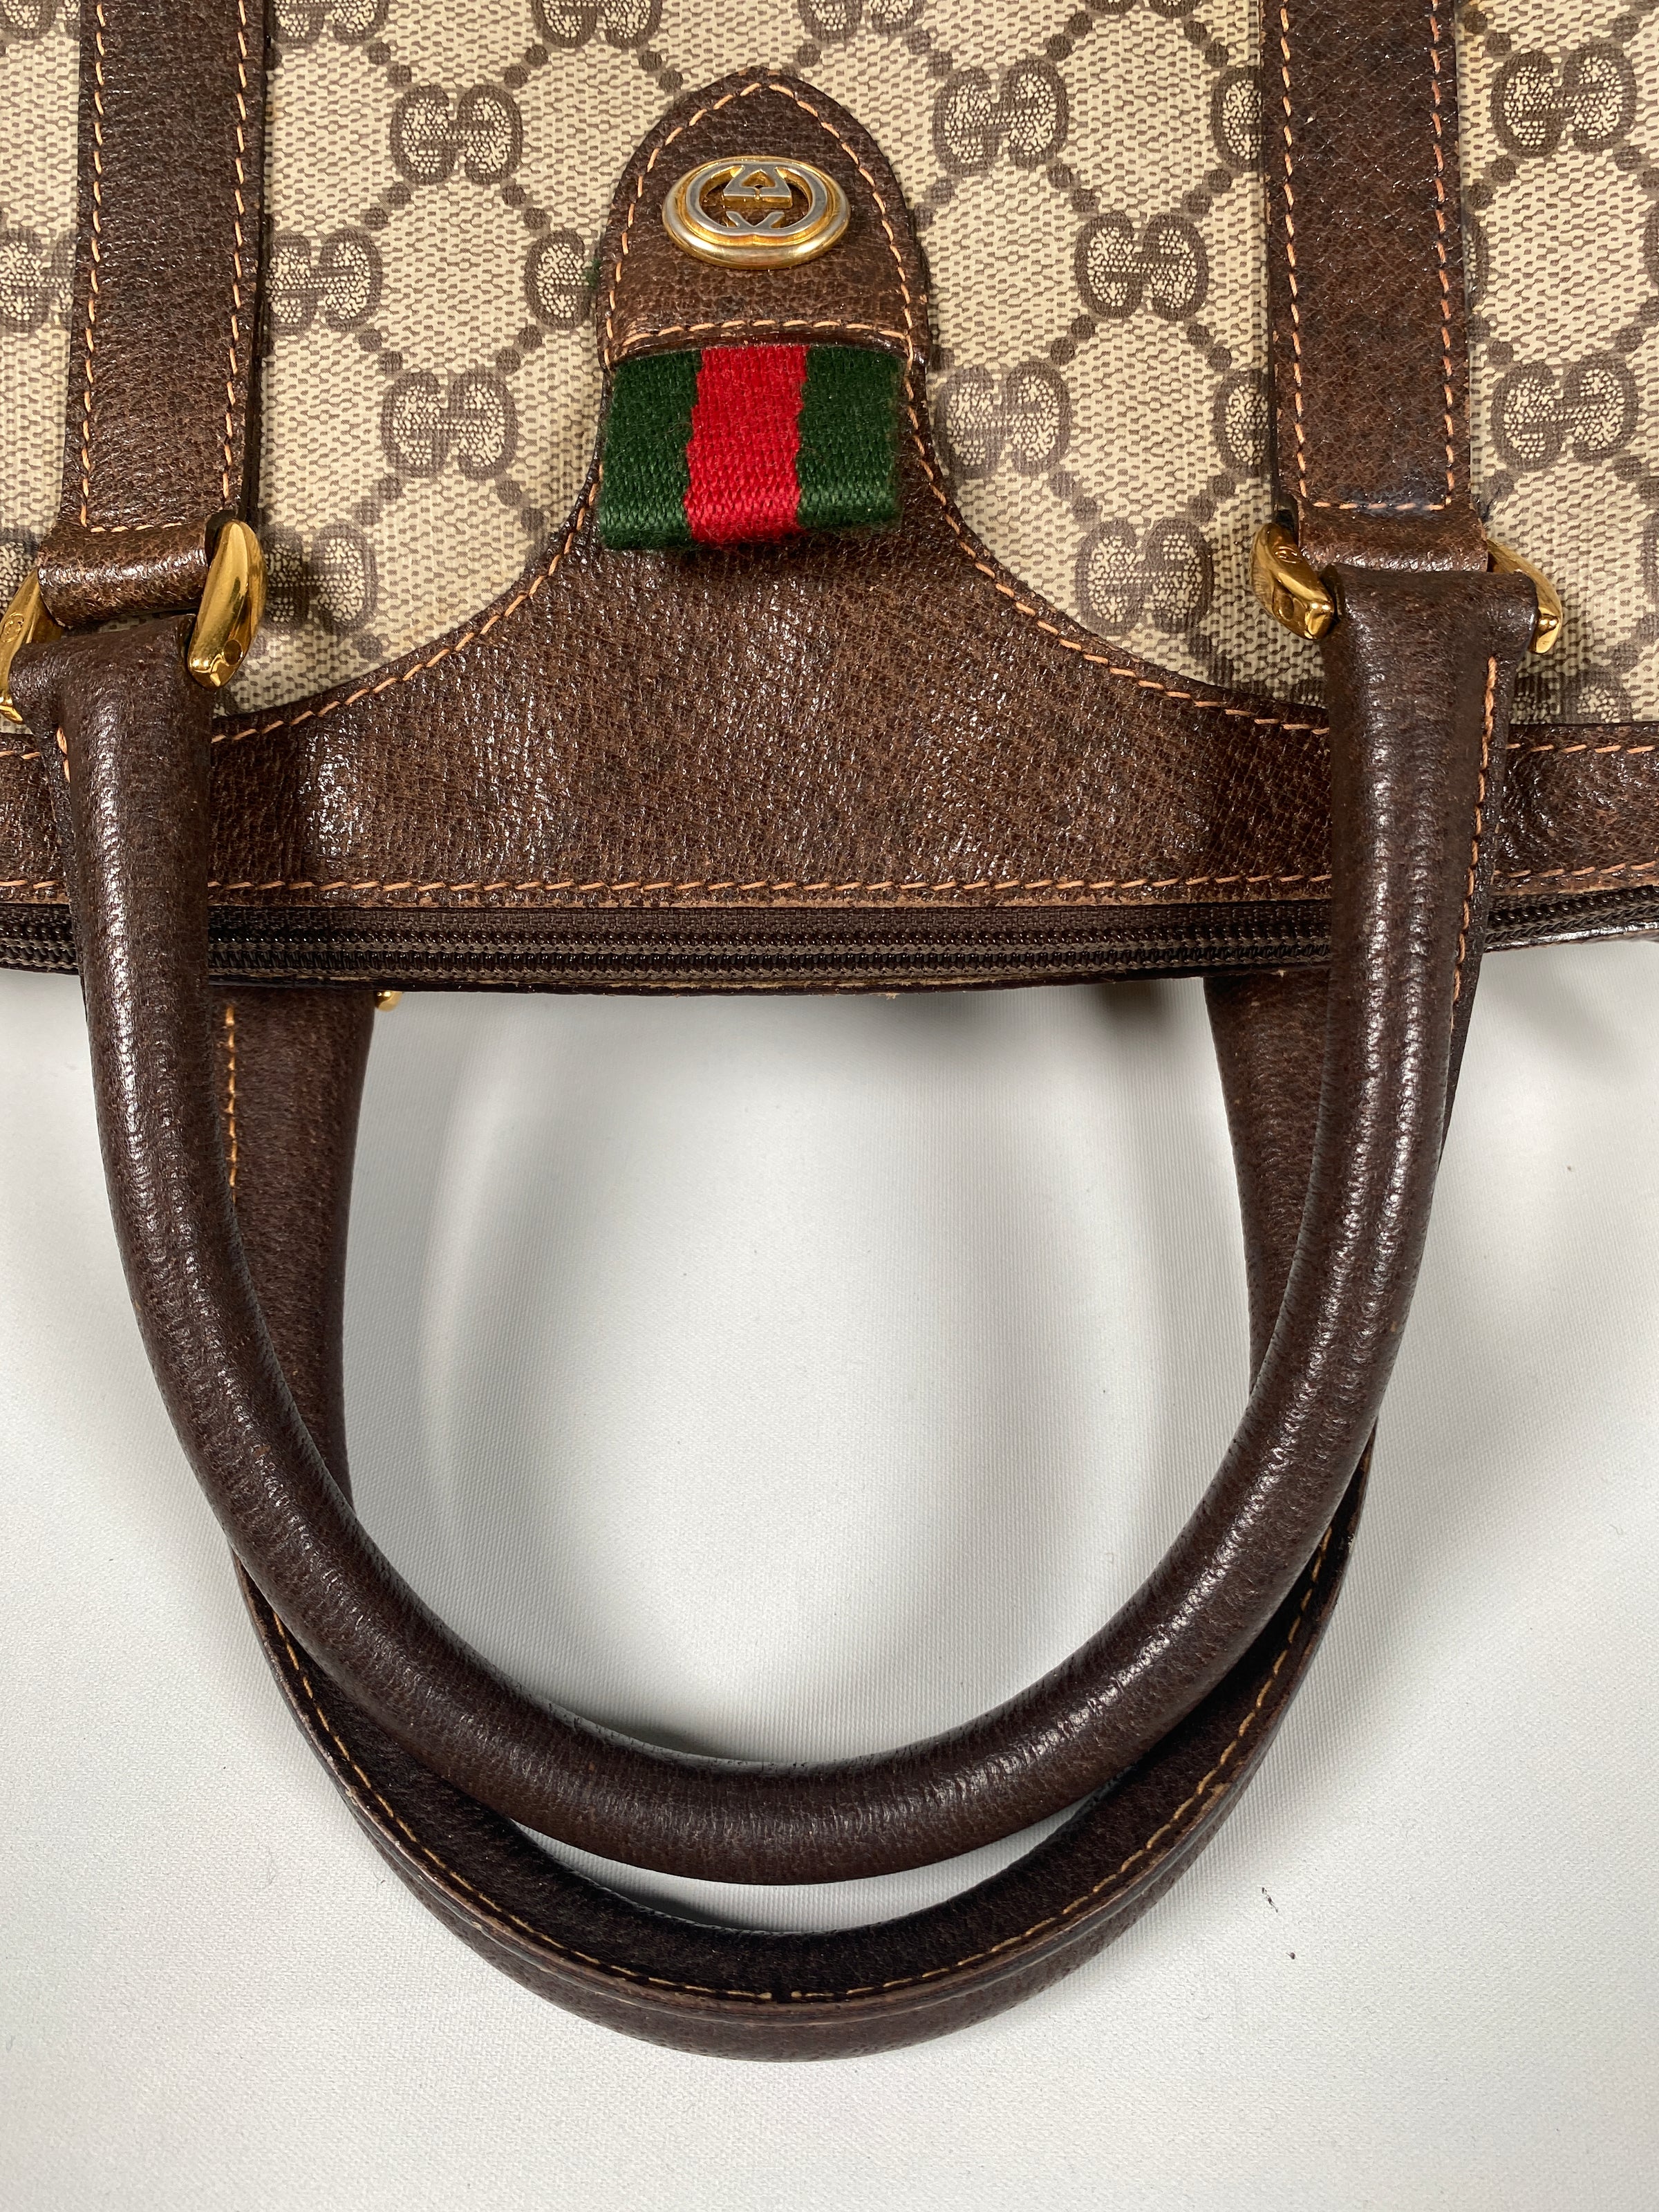 Sold at Auction: Gucci Vintage GG Supreme Canvas Small Boston Bag